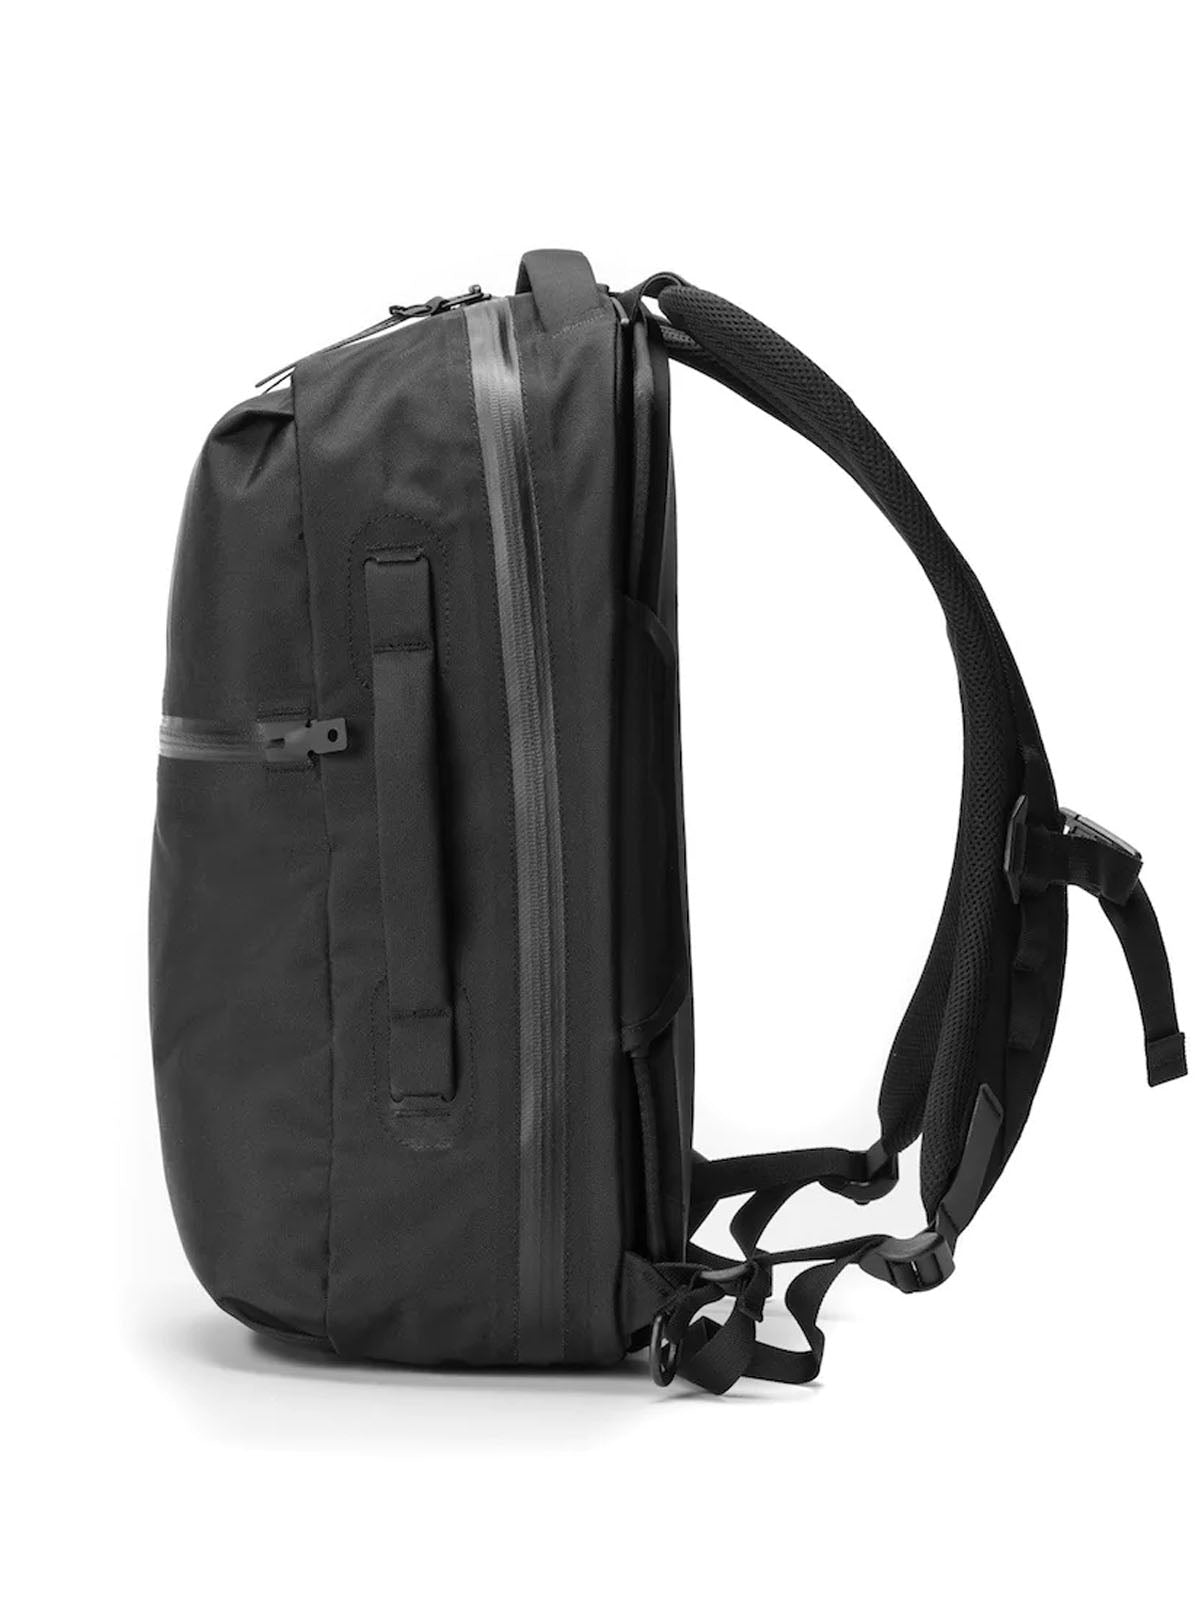 Black Ember Shadow 22 Backpack Black - MORE by Morello Indonesia